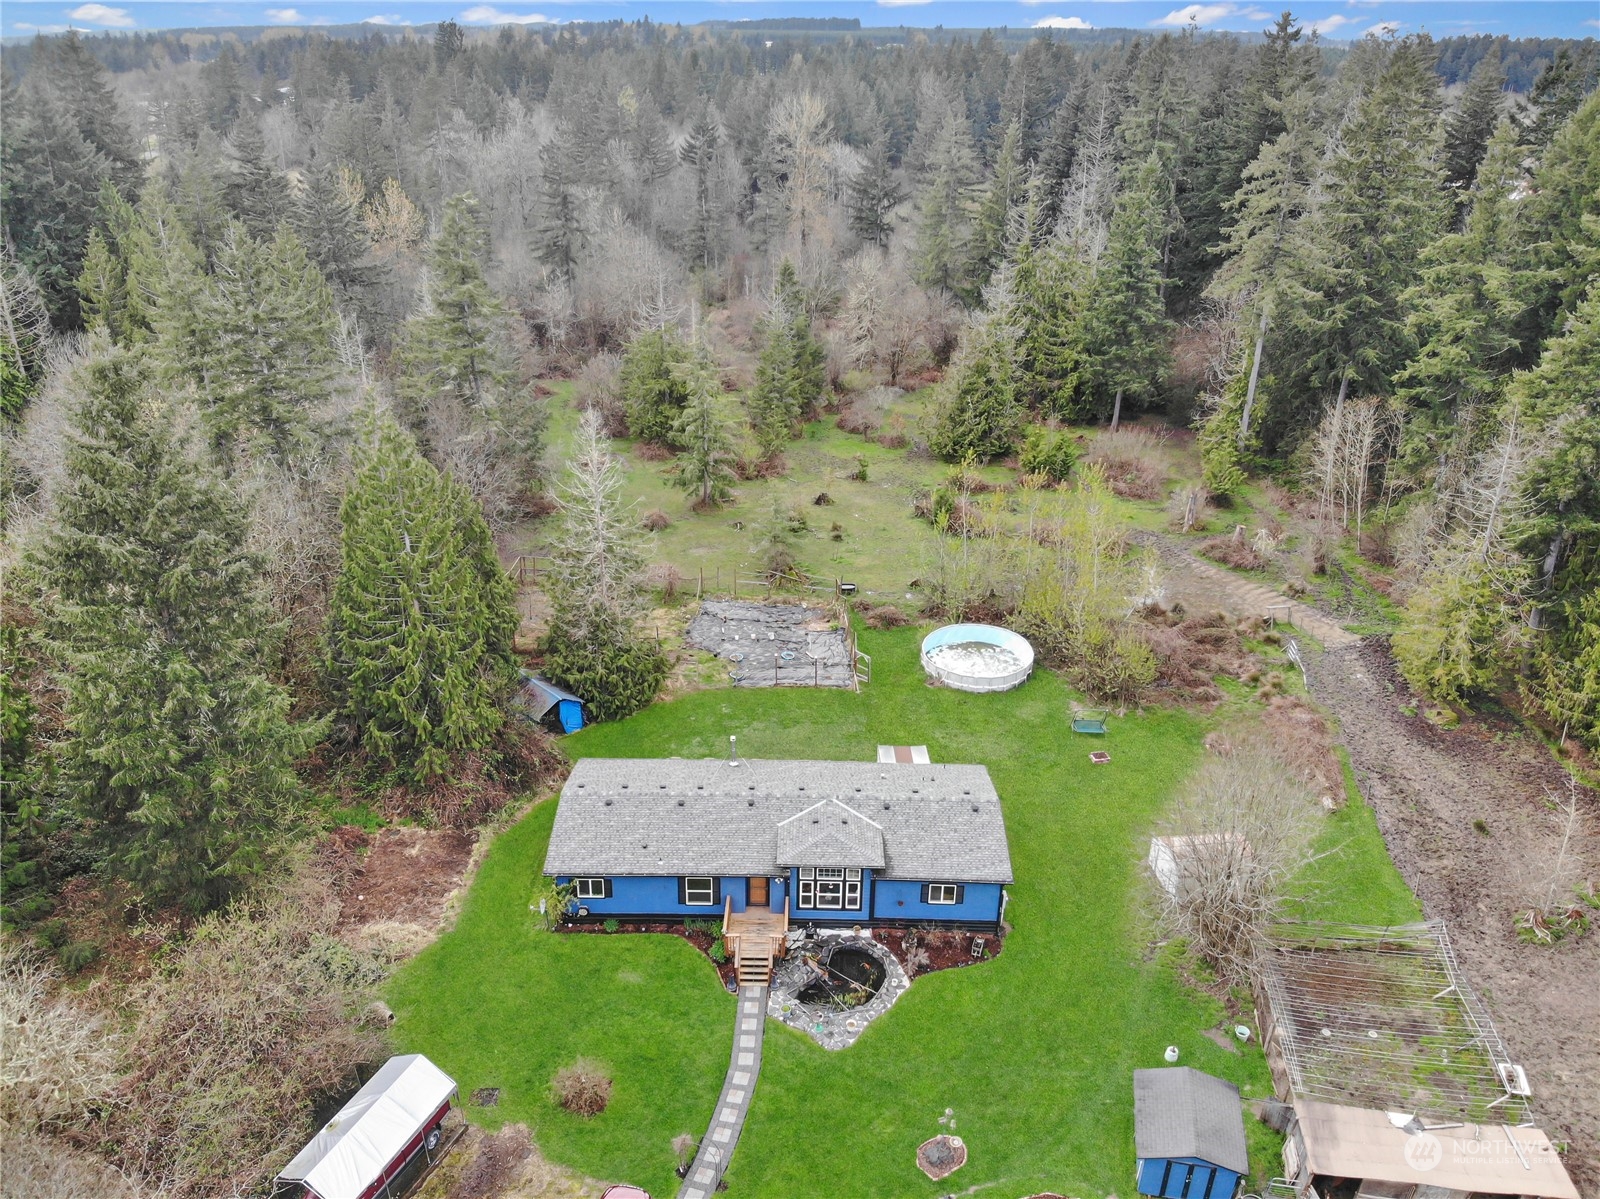 aerial view of a house with a yard